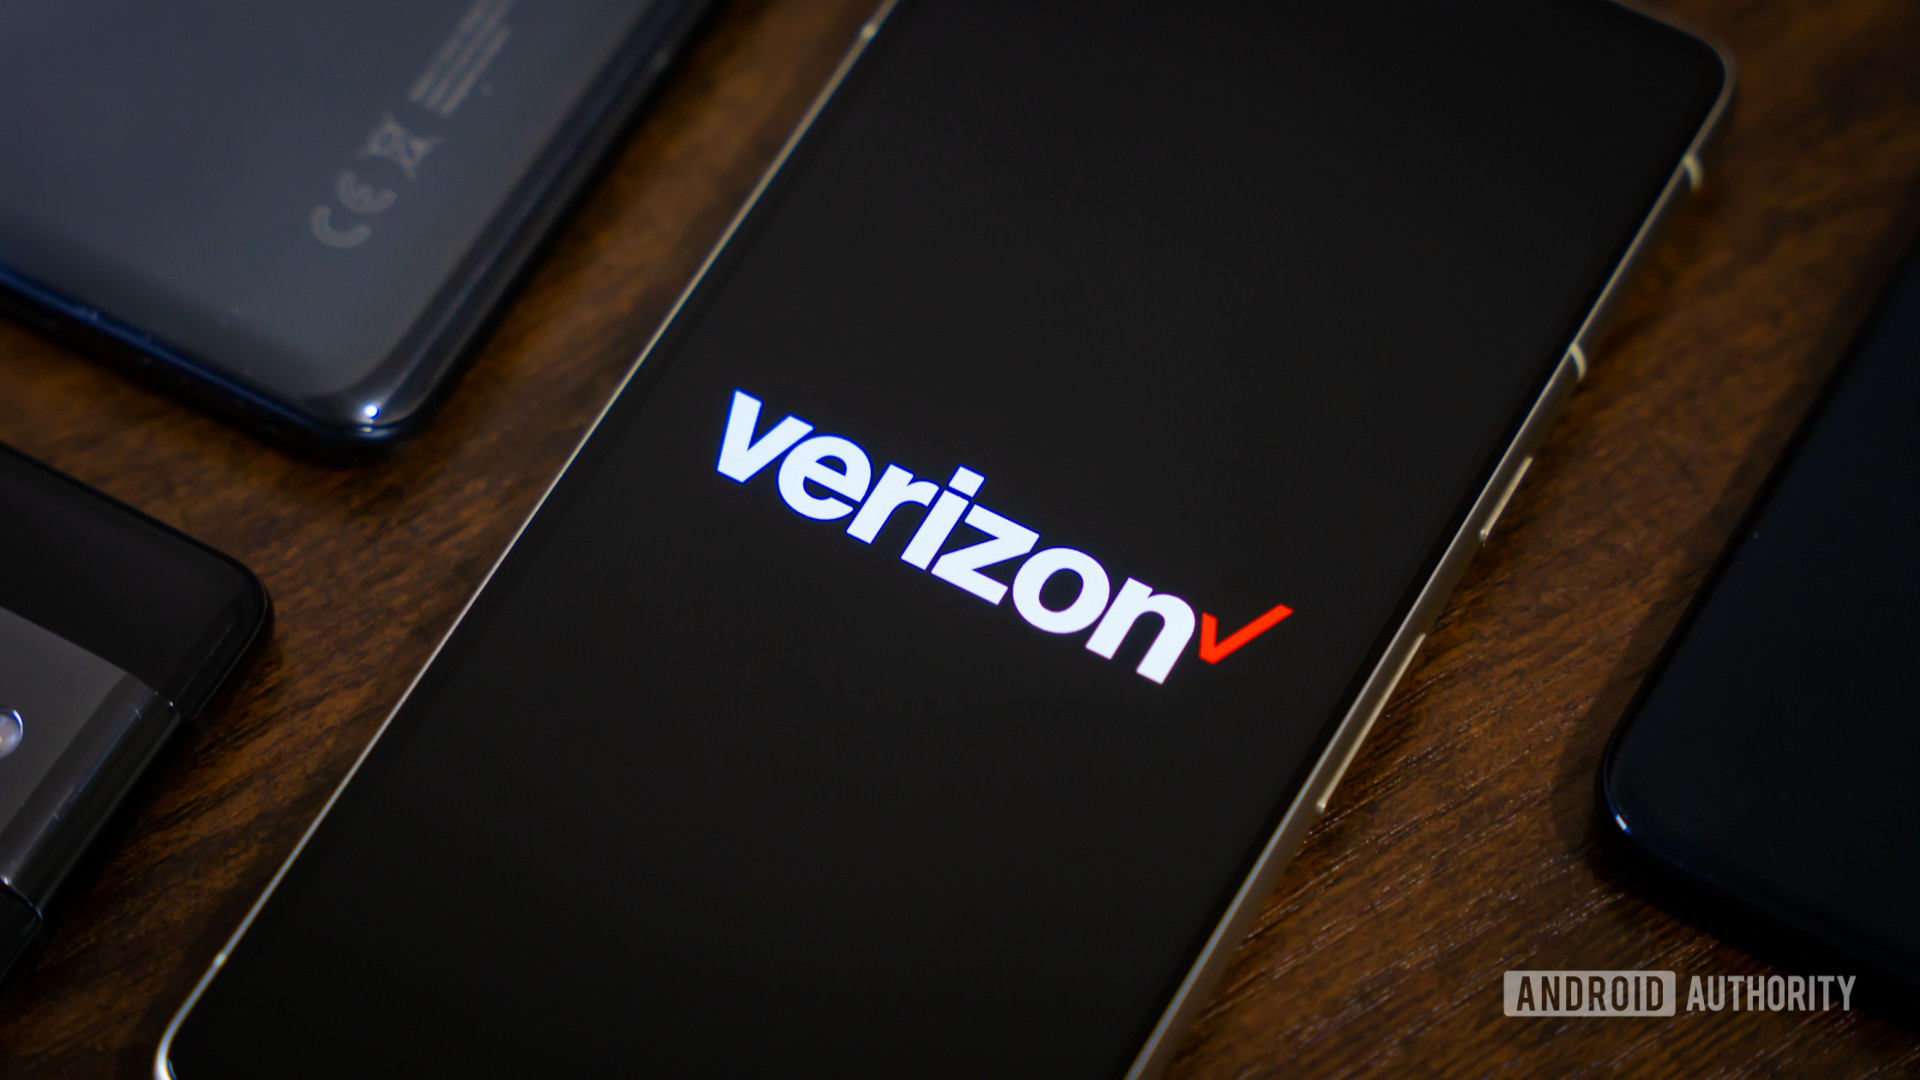 Verizon logo on smartphone, next to other devices (1)